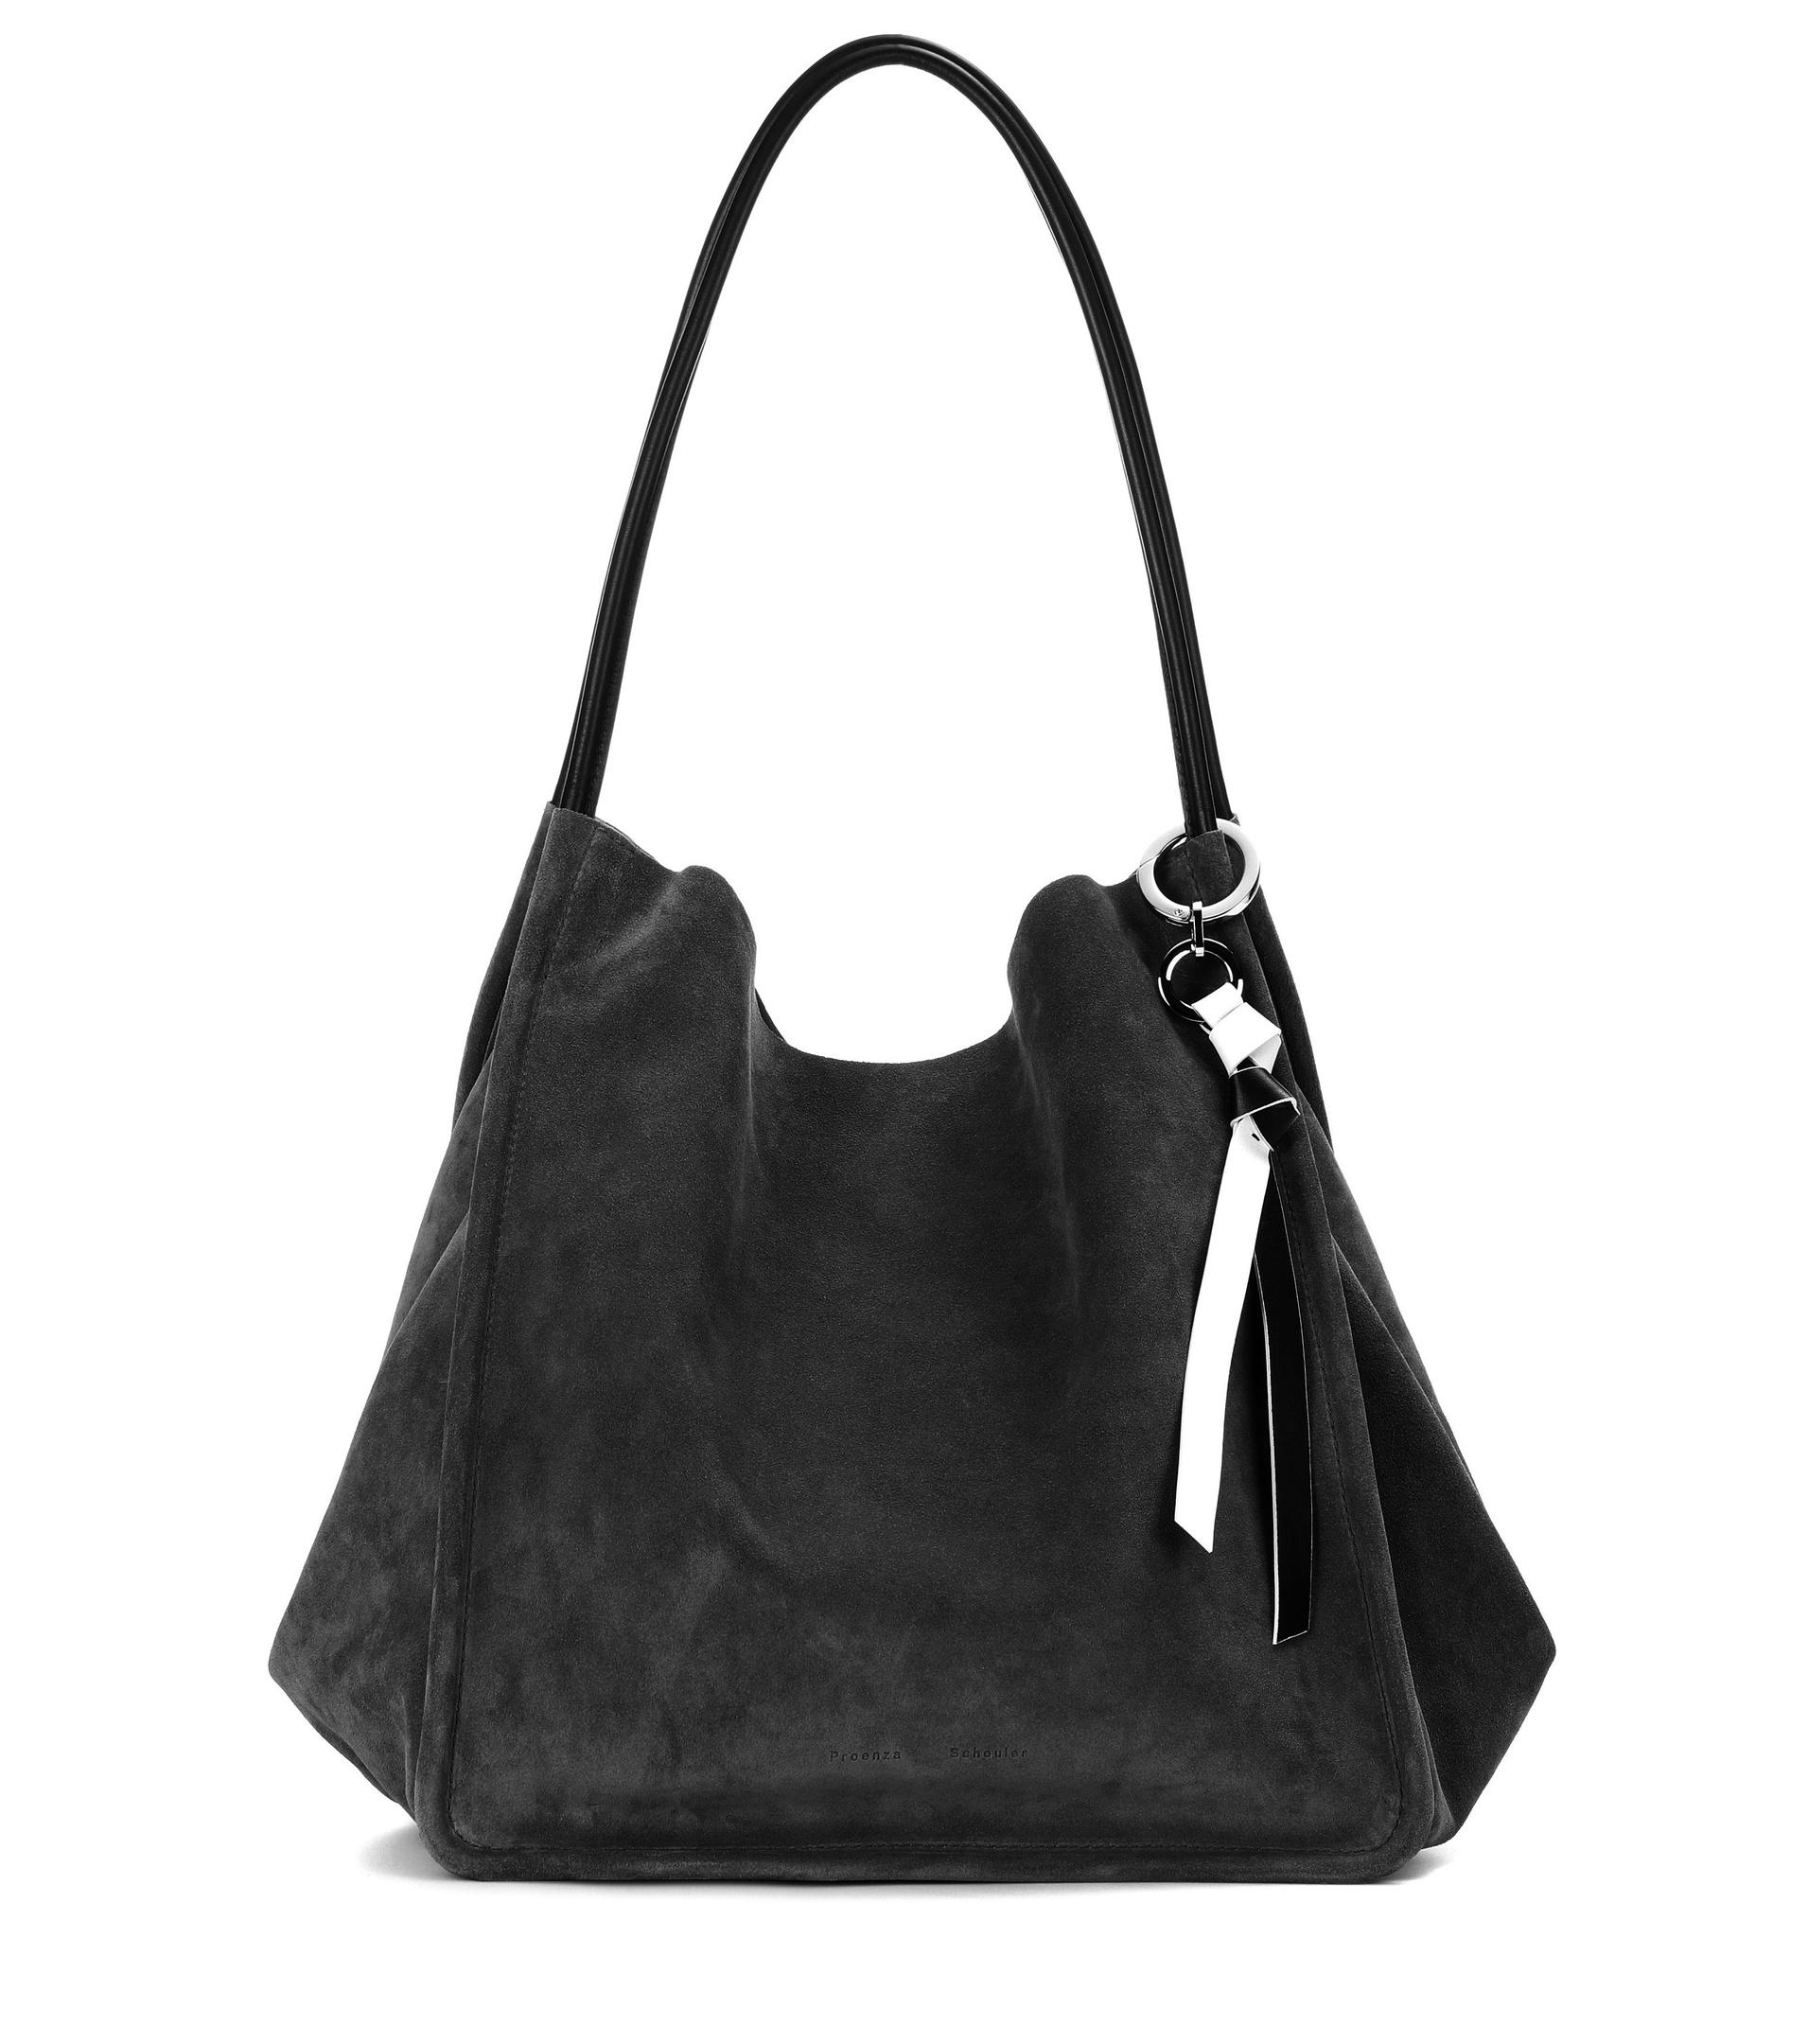 Proenza Schouler Extra Large Suede Tote Bag in Black - Lyst